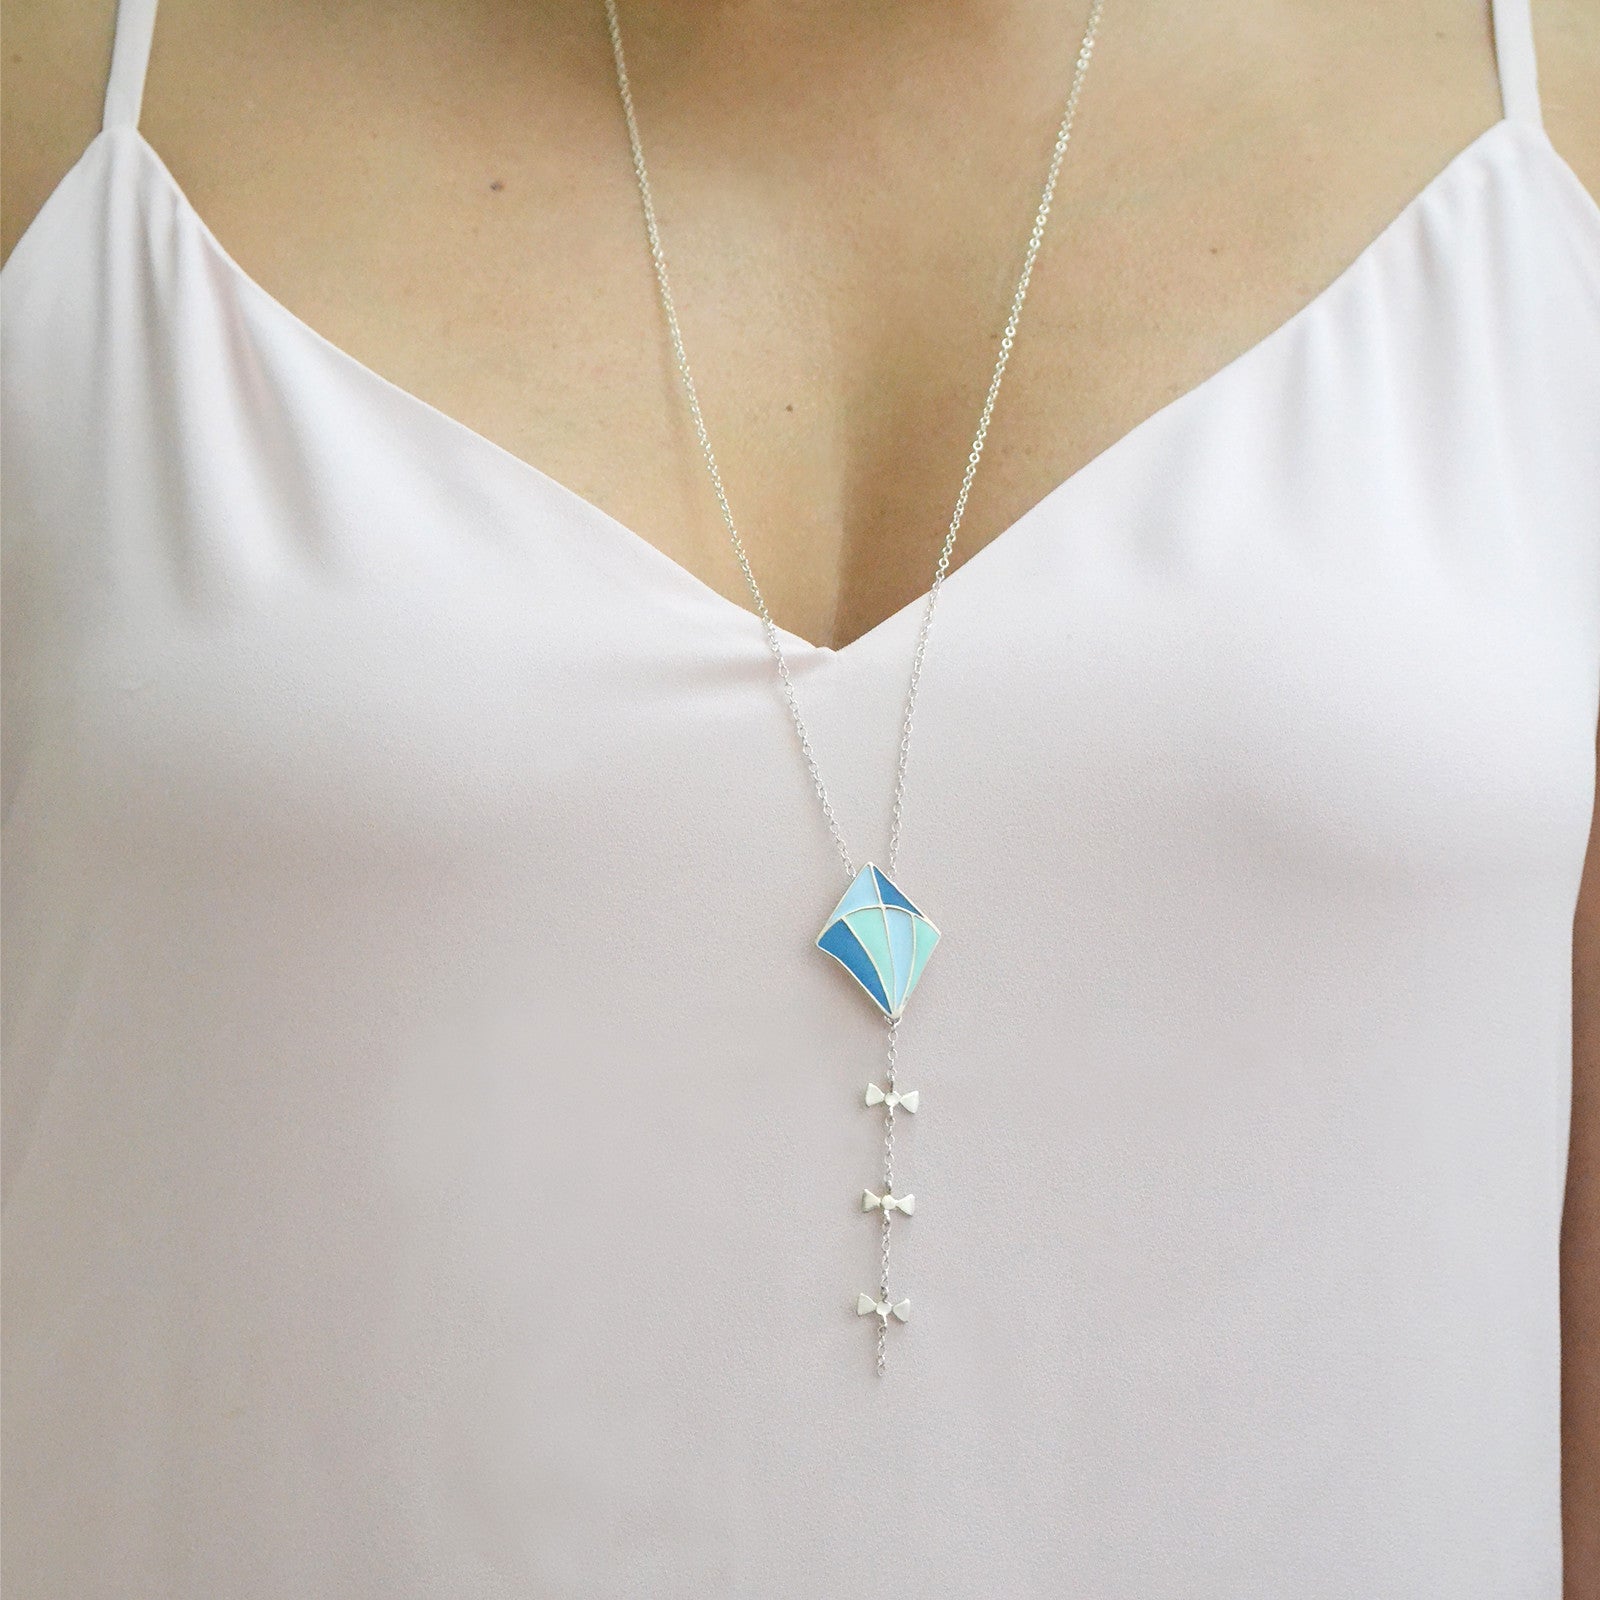 long kite necklace